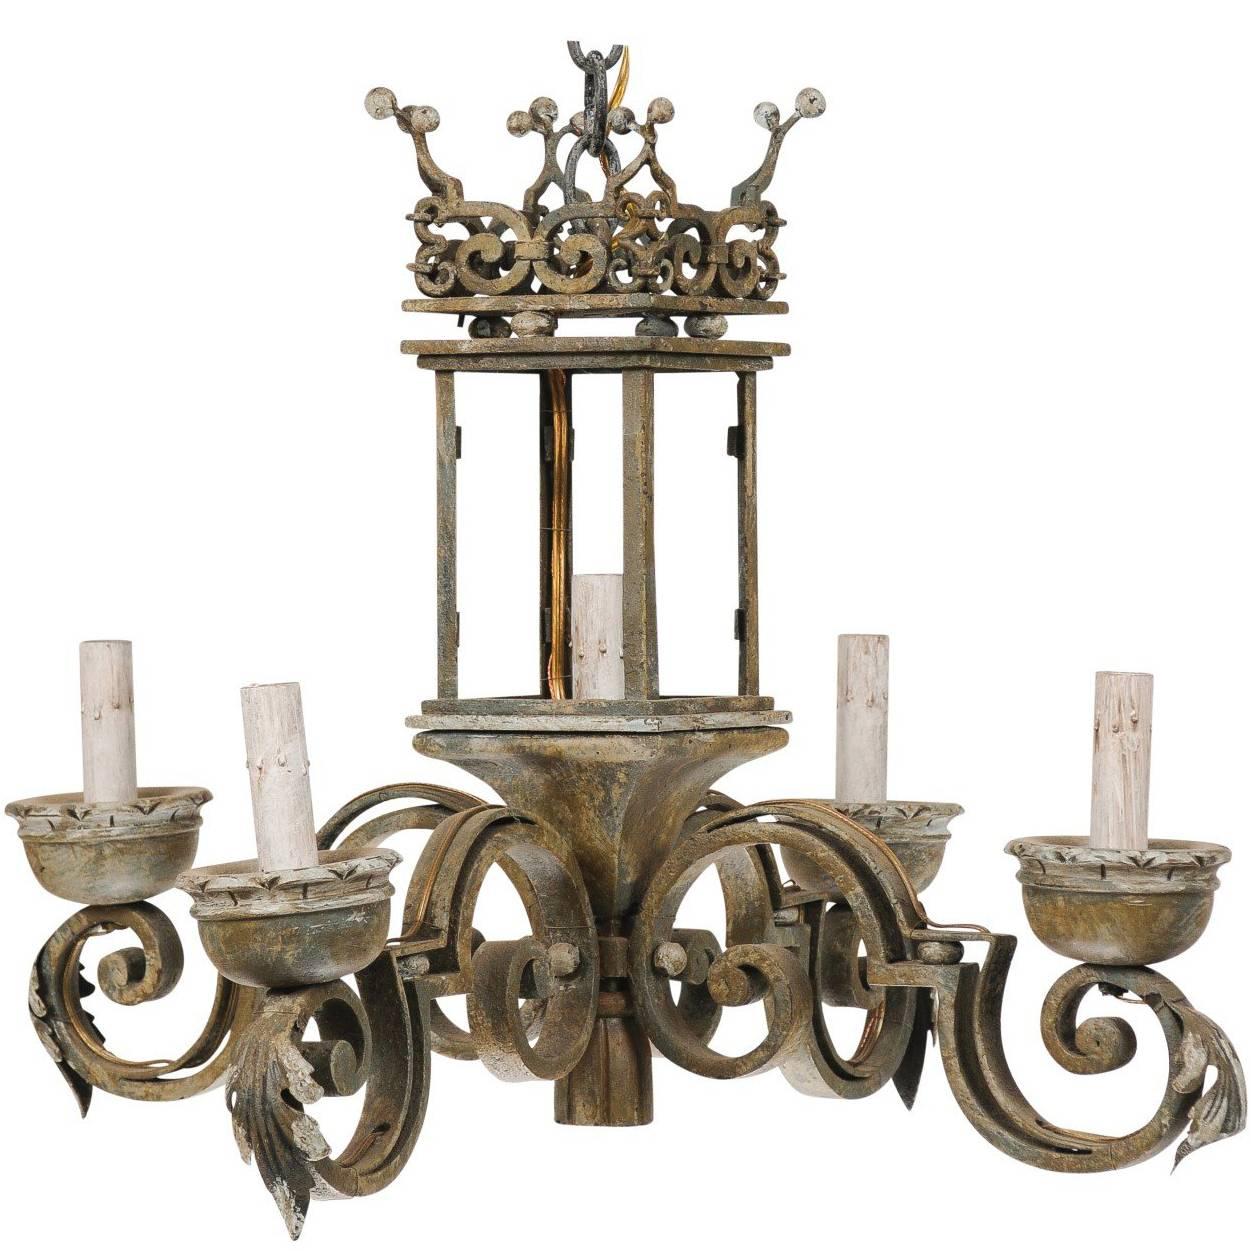 Italian Chandelier with Regal Crown at the Top, Hand-Forged Iron & Painted Wood